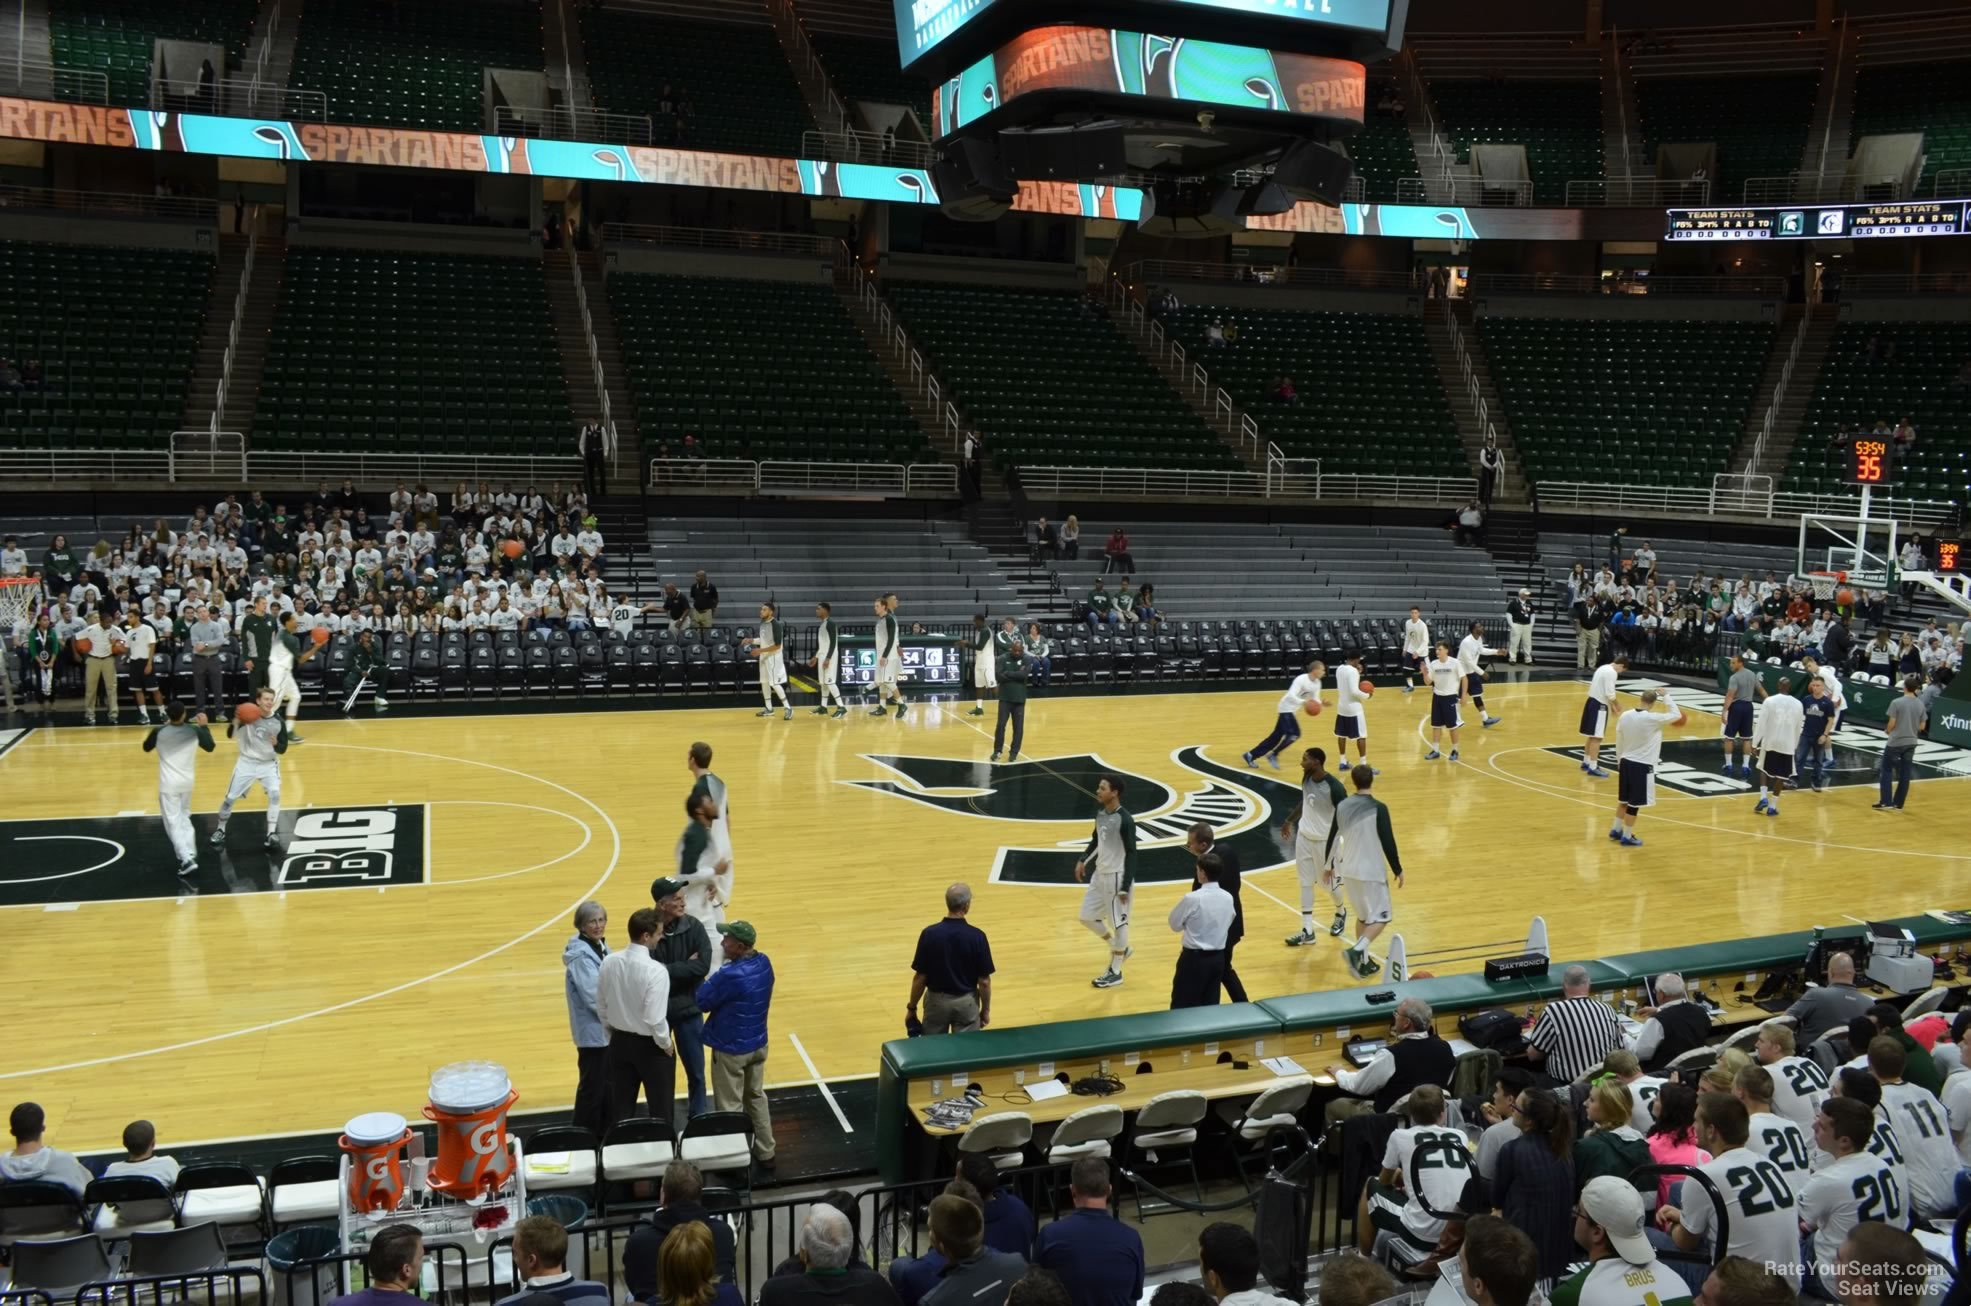 section 111, row 13 seat view  - breslin center